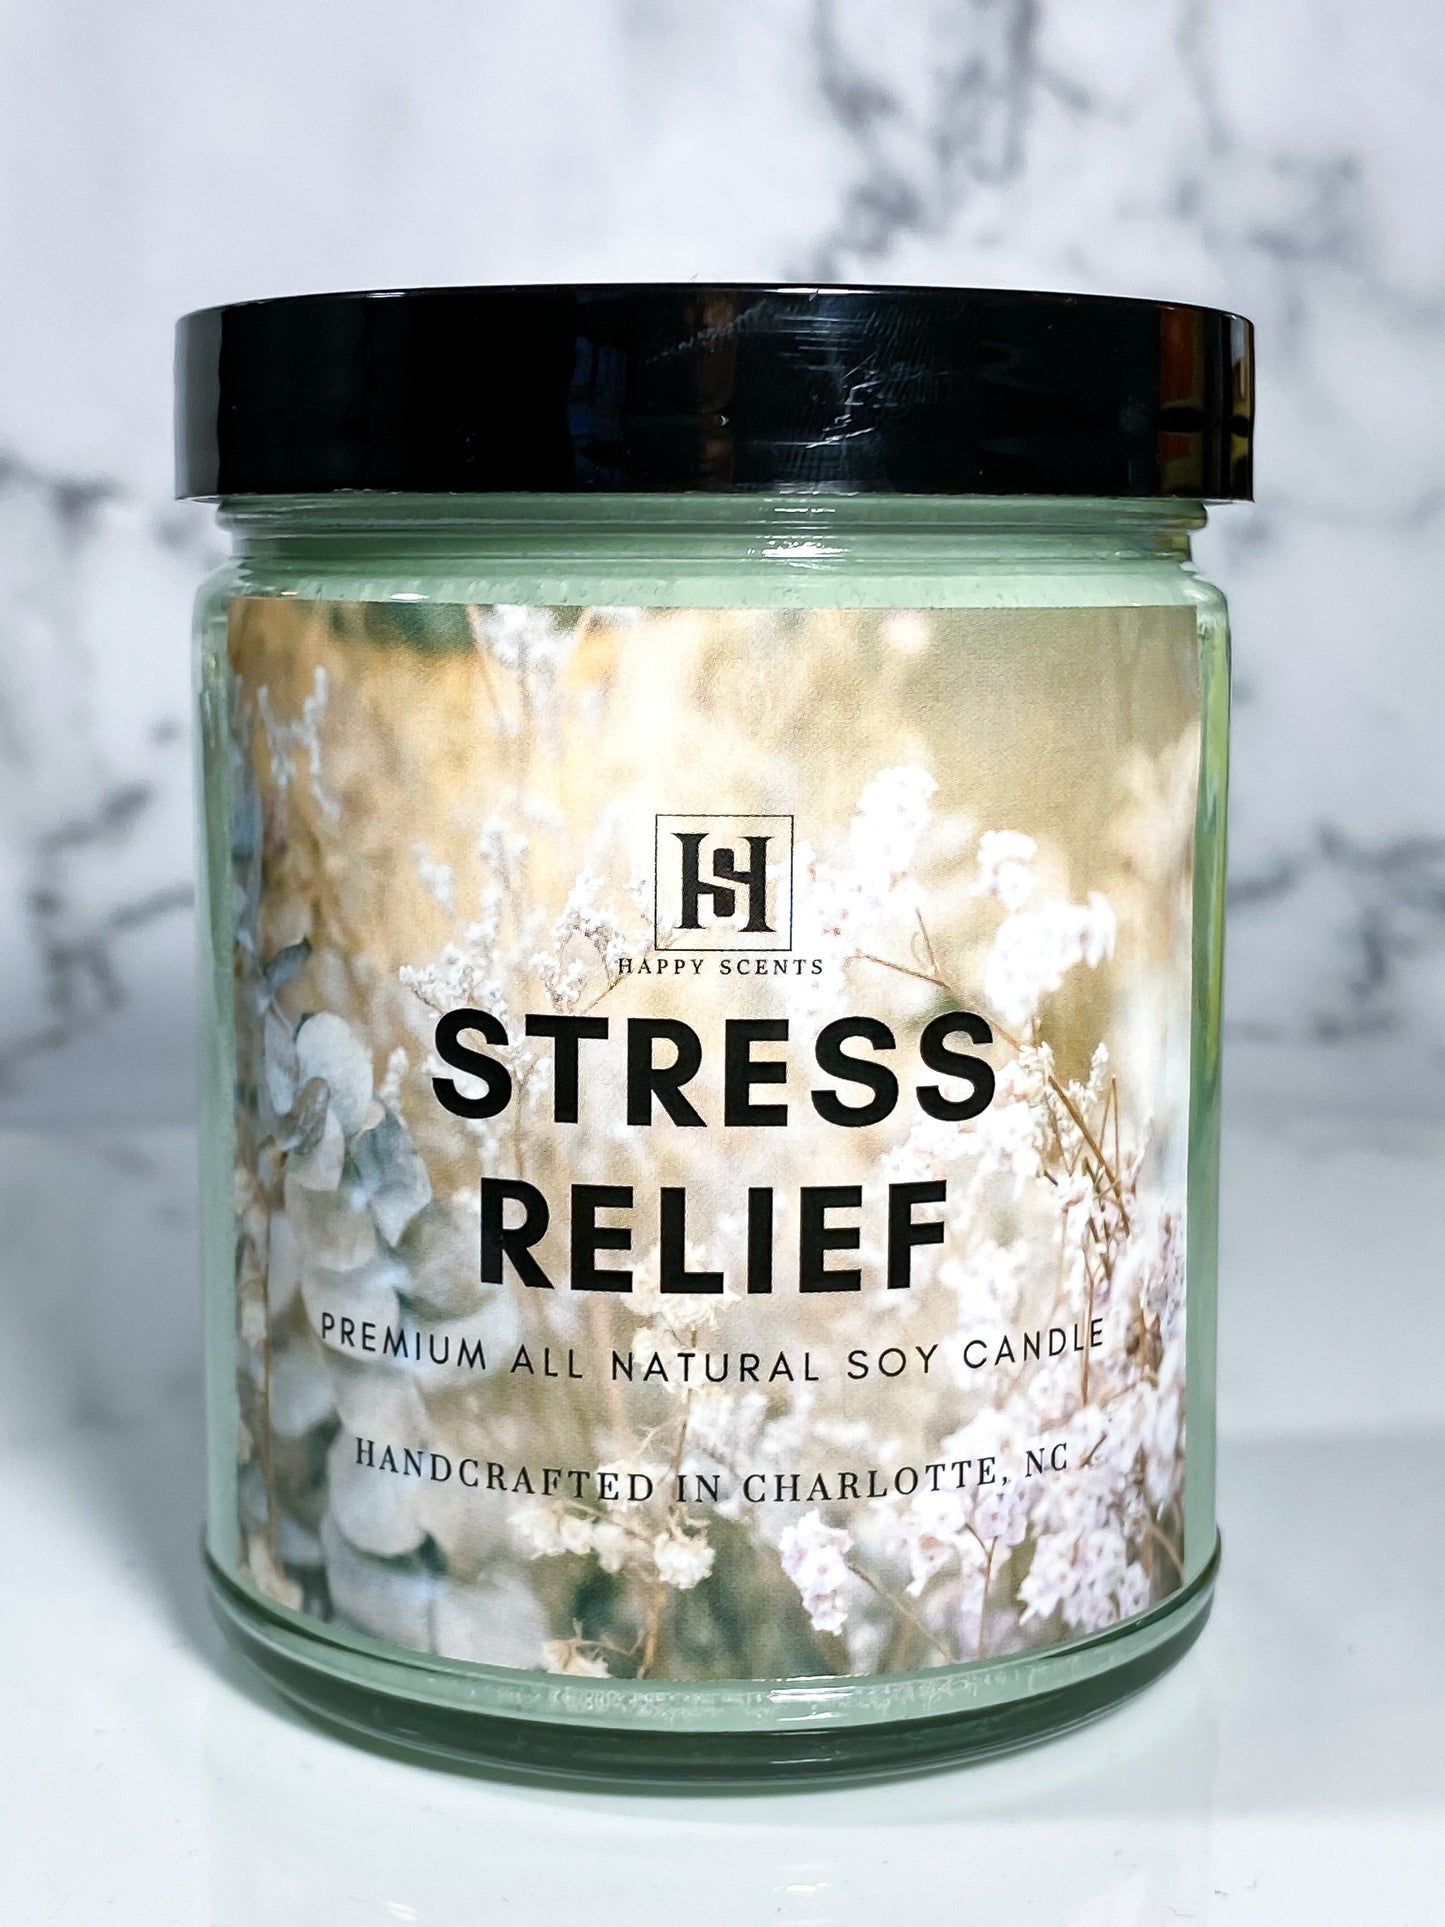 Stress Relief Jar Candle